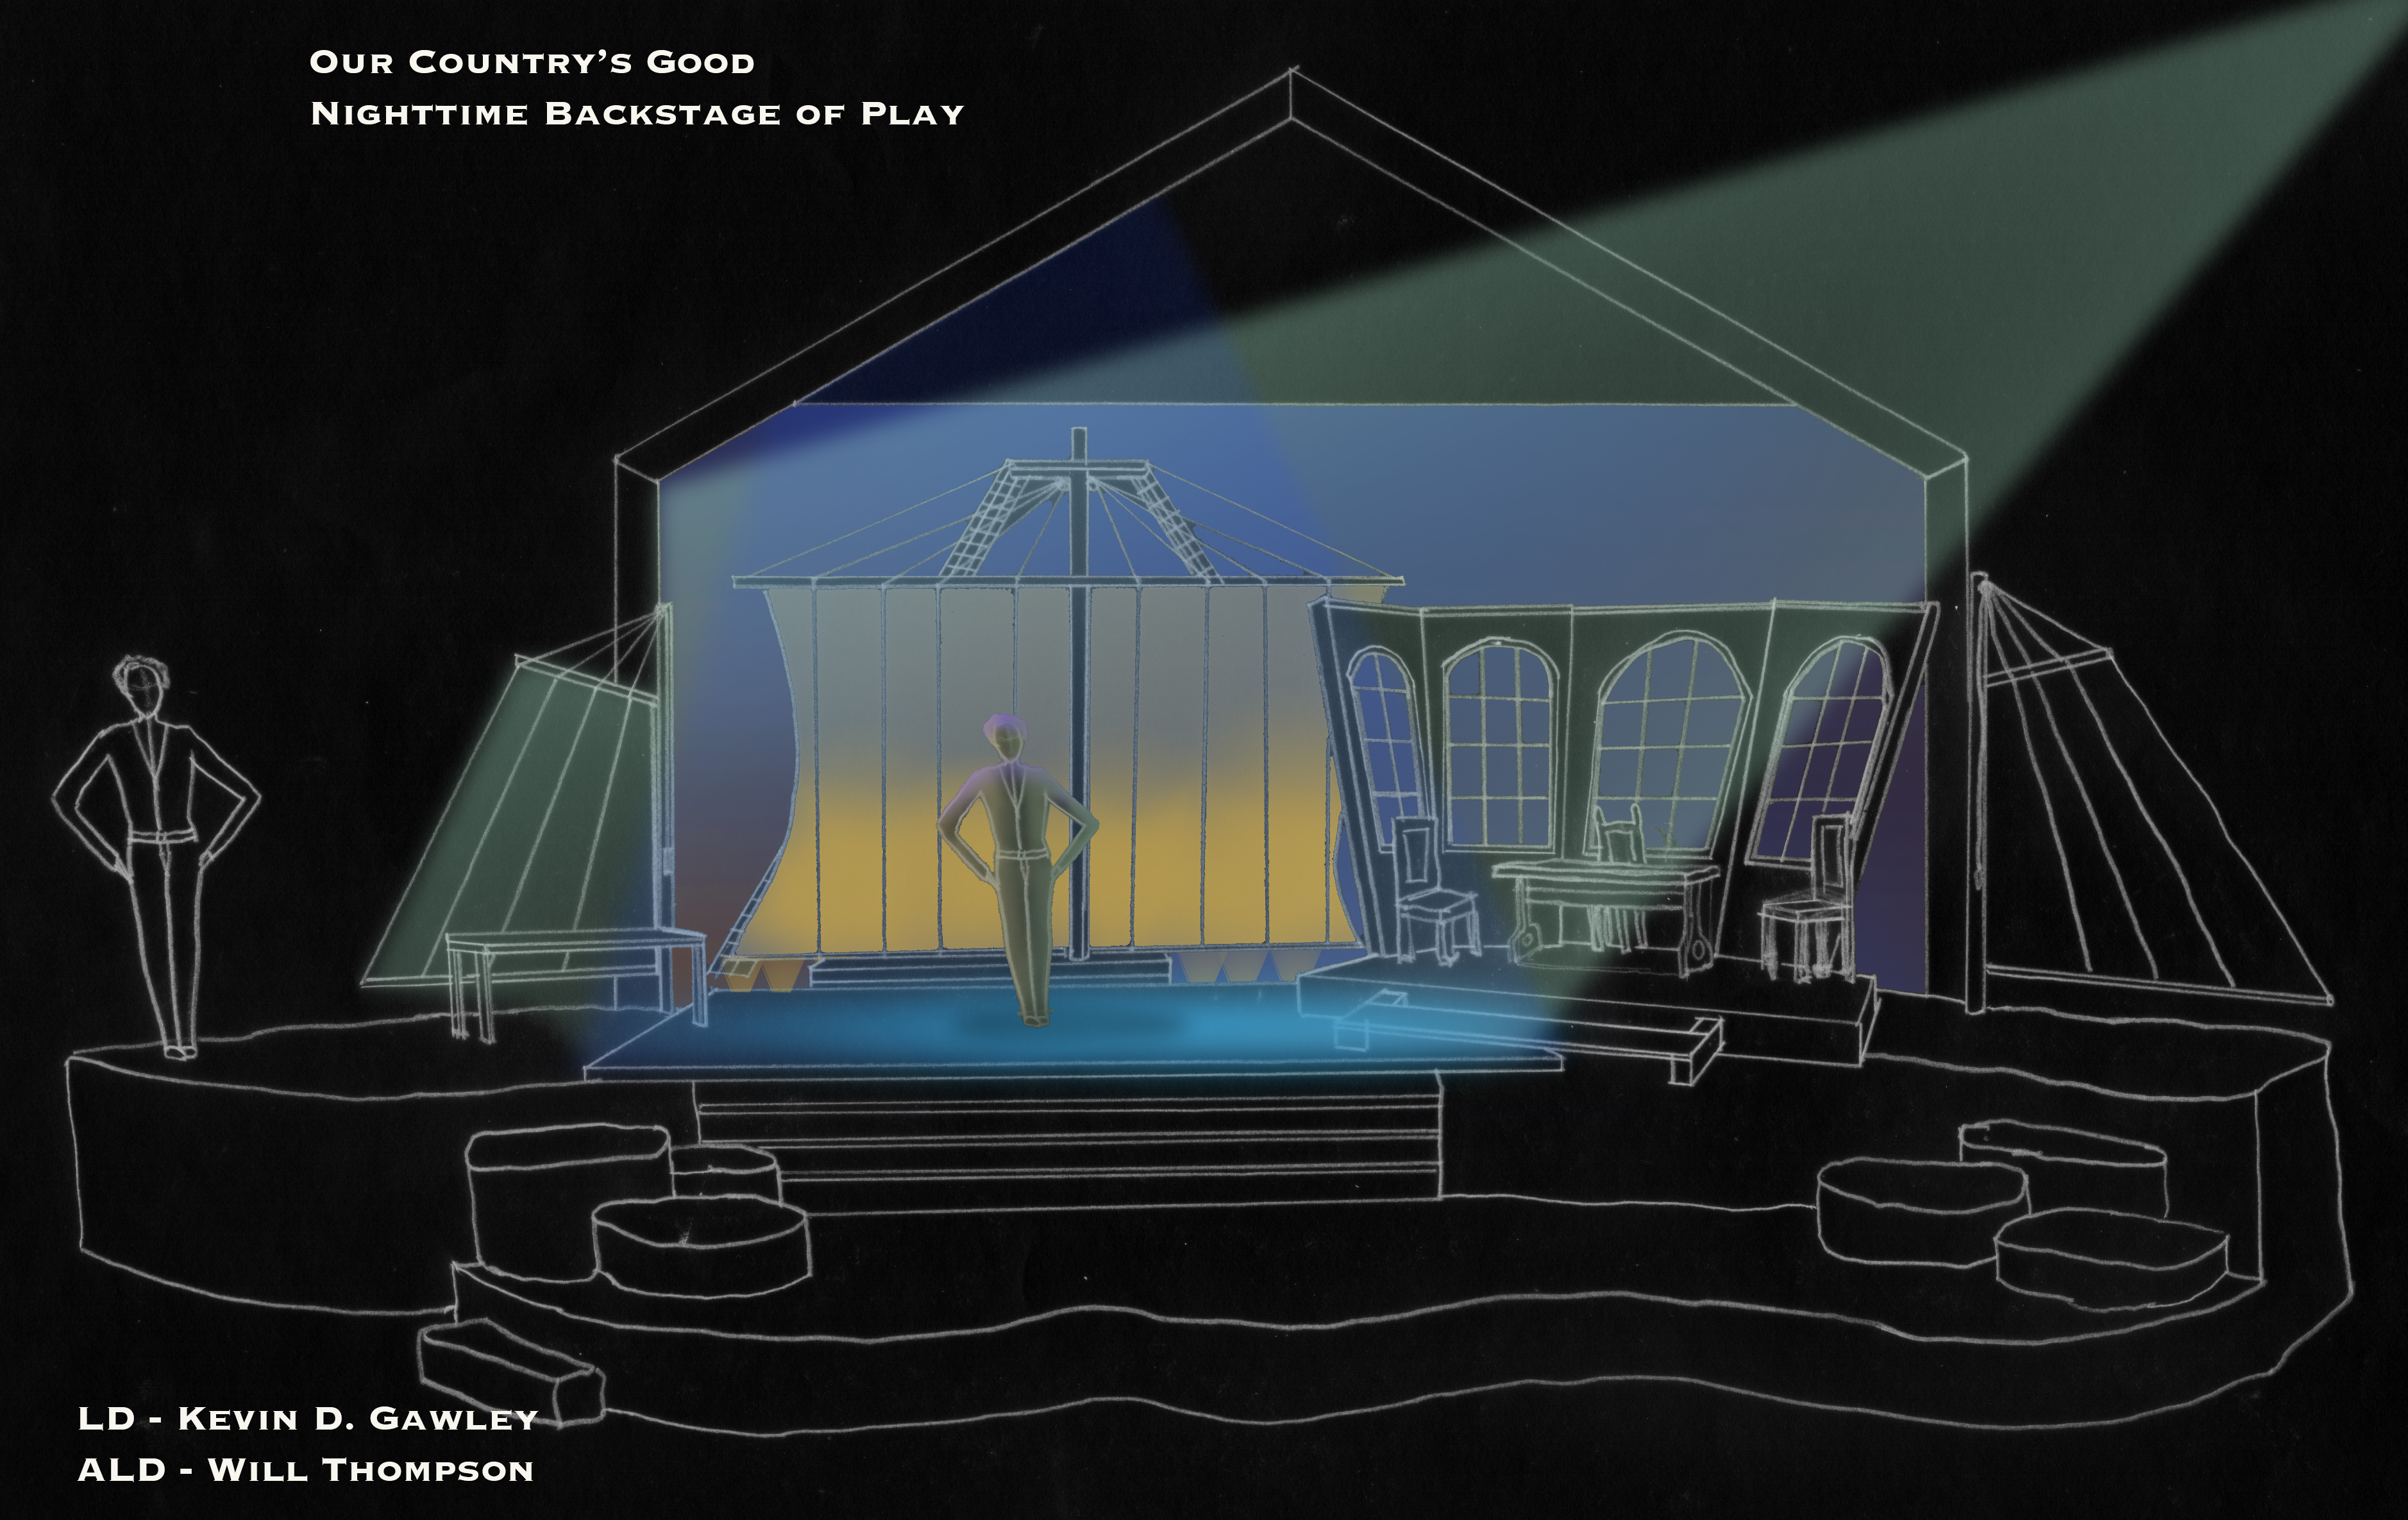 A scene sketch by Gawley from Theatre Arts' production of "Our Country's Good"